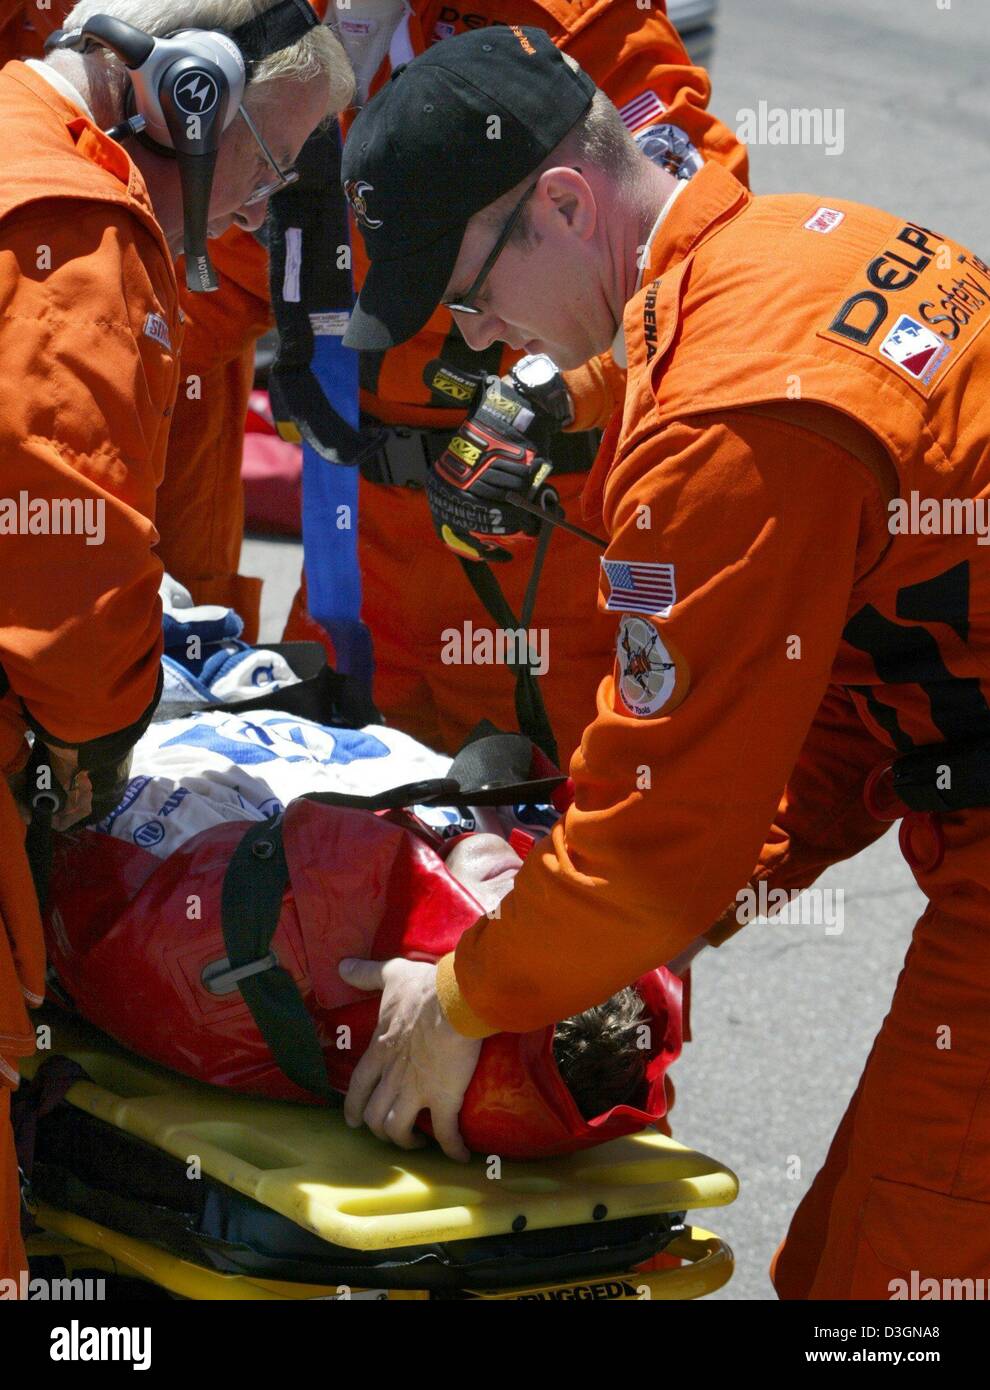 (dpa) - Paramedics and members of the safety team position German formula one pilot Ralf Schumacher of BMW-Williams on a stretcher after his accident during the US Grand Prix on the racetrack in Indianapolis, USA, 20 June 2004. Ralf Schumach ran with top speed of around 300 kilometres per hour into a barrier along the racetrack in the tenth lap of the race. Stock Photo